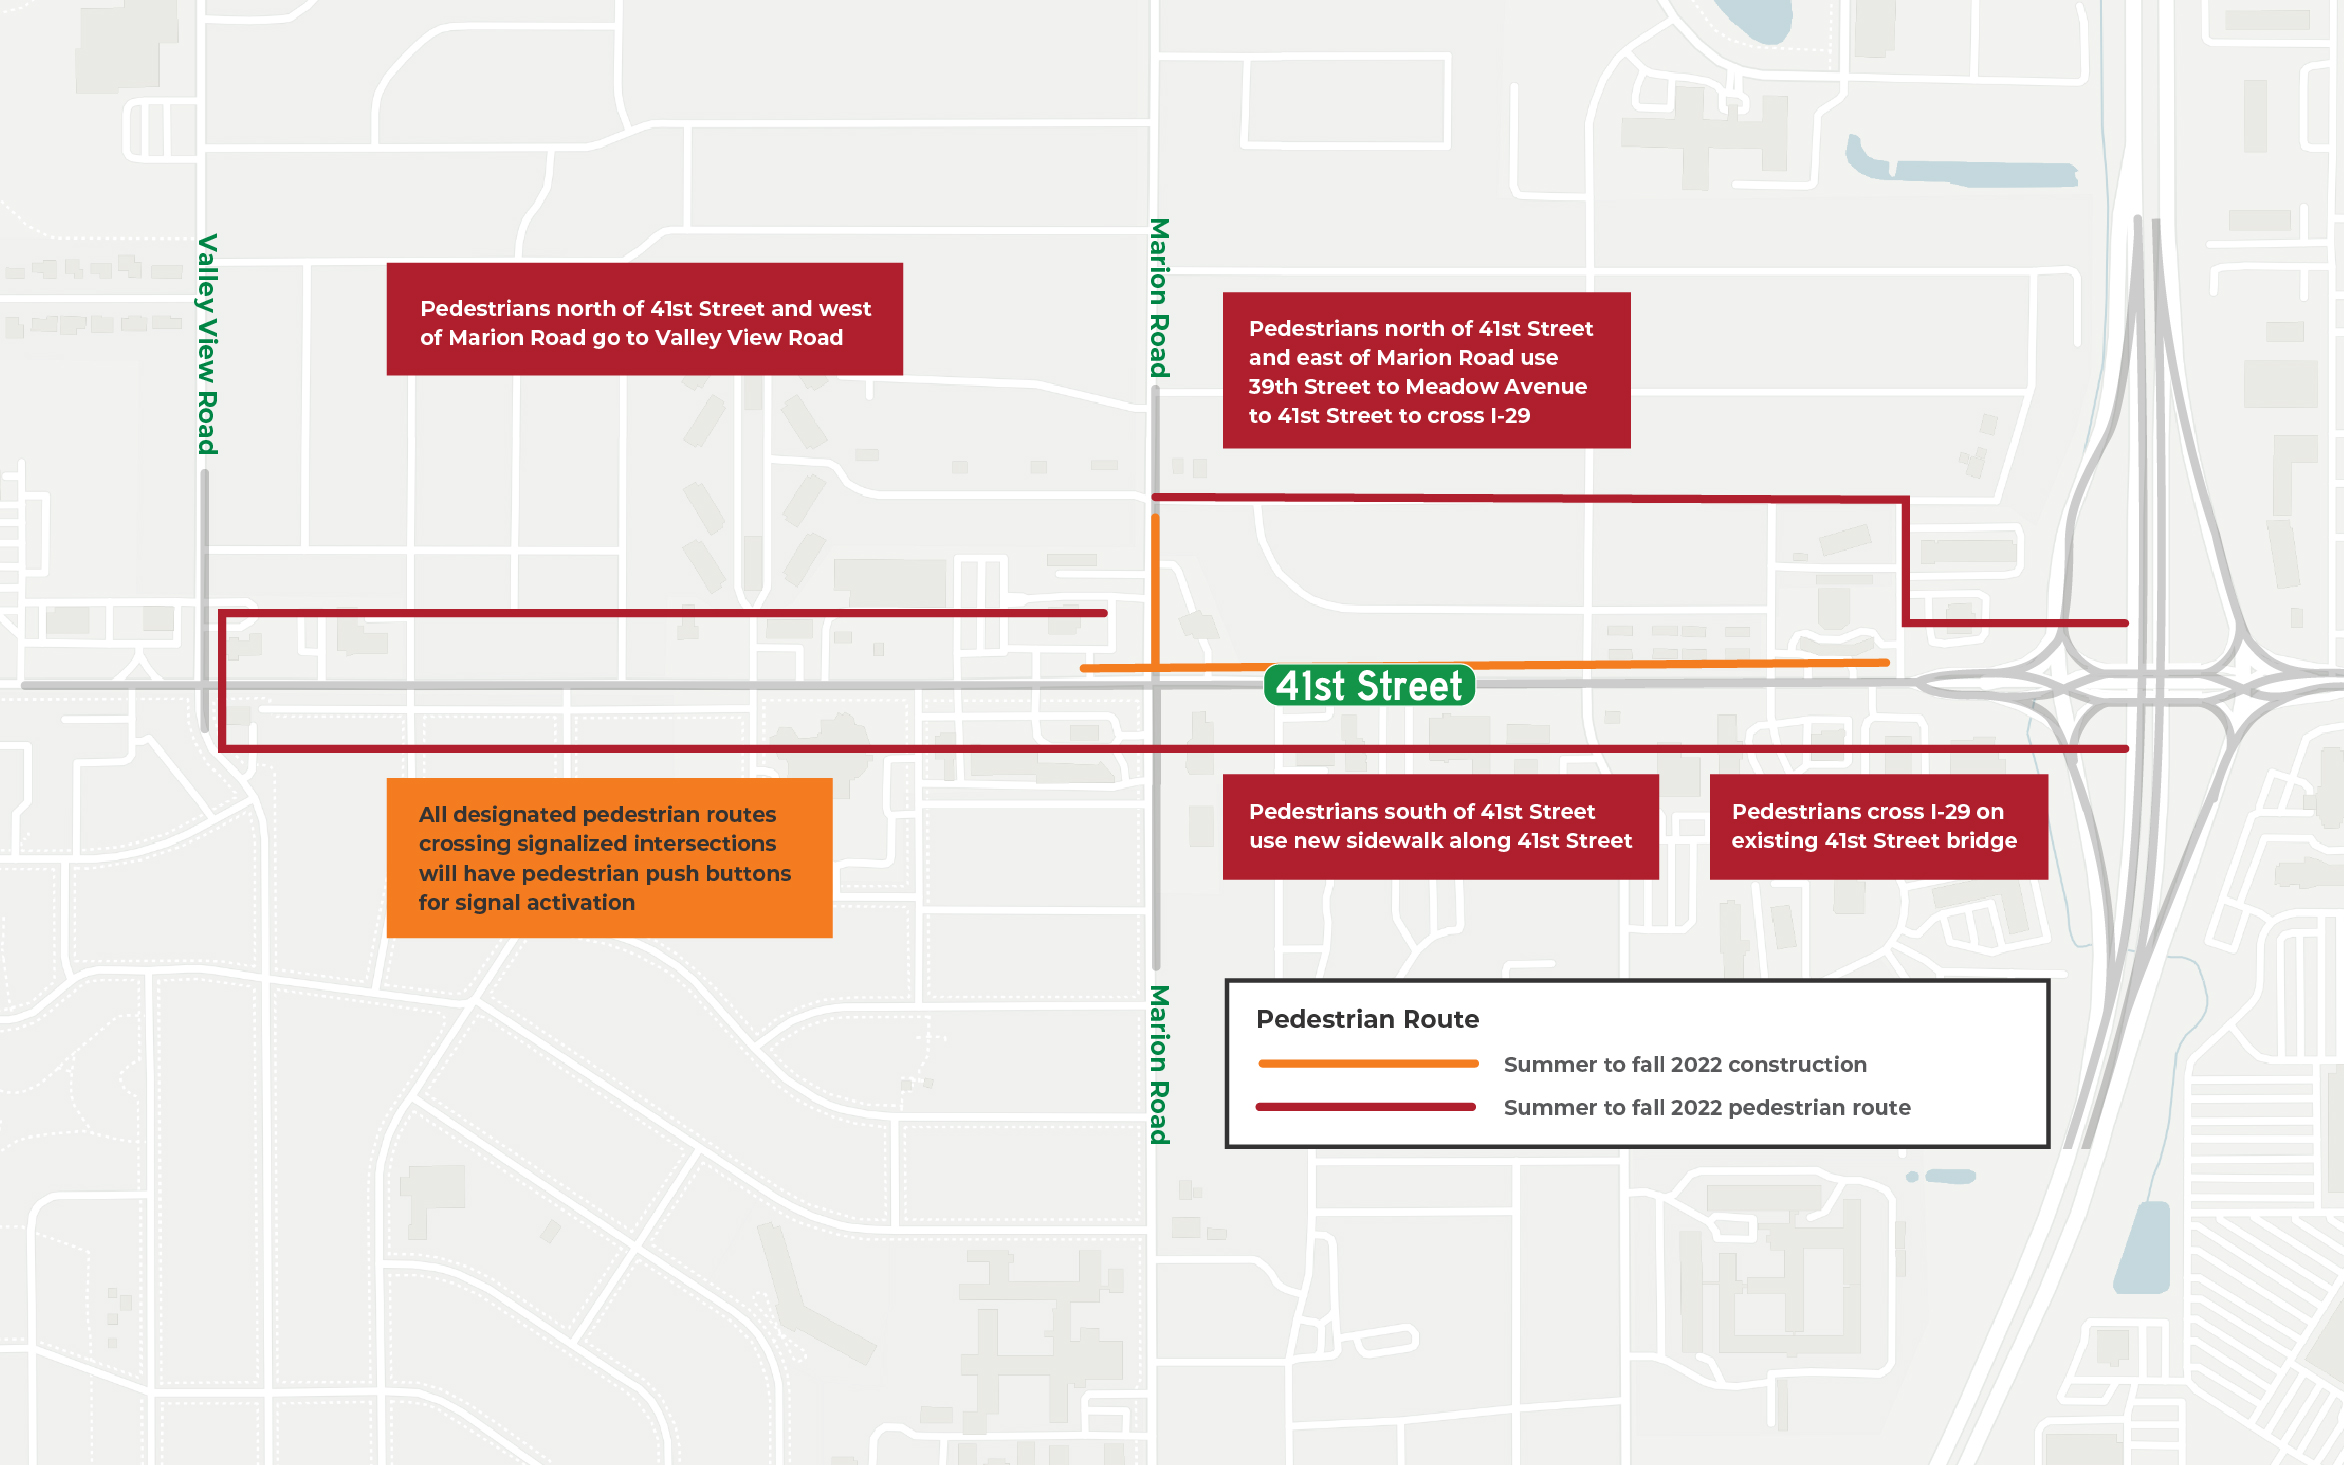 Pedestrian Route Detour map for Summer to Fall 2022